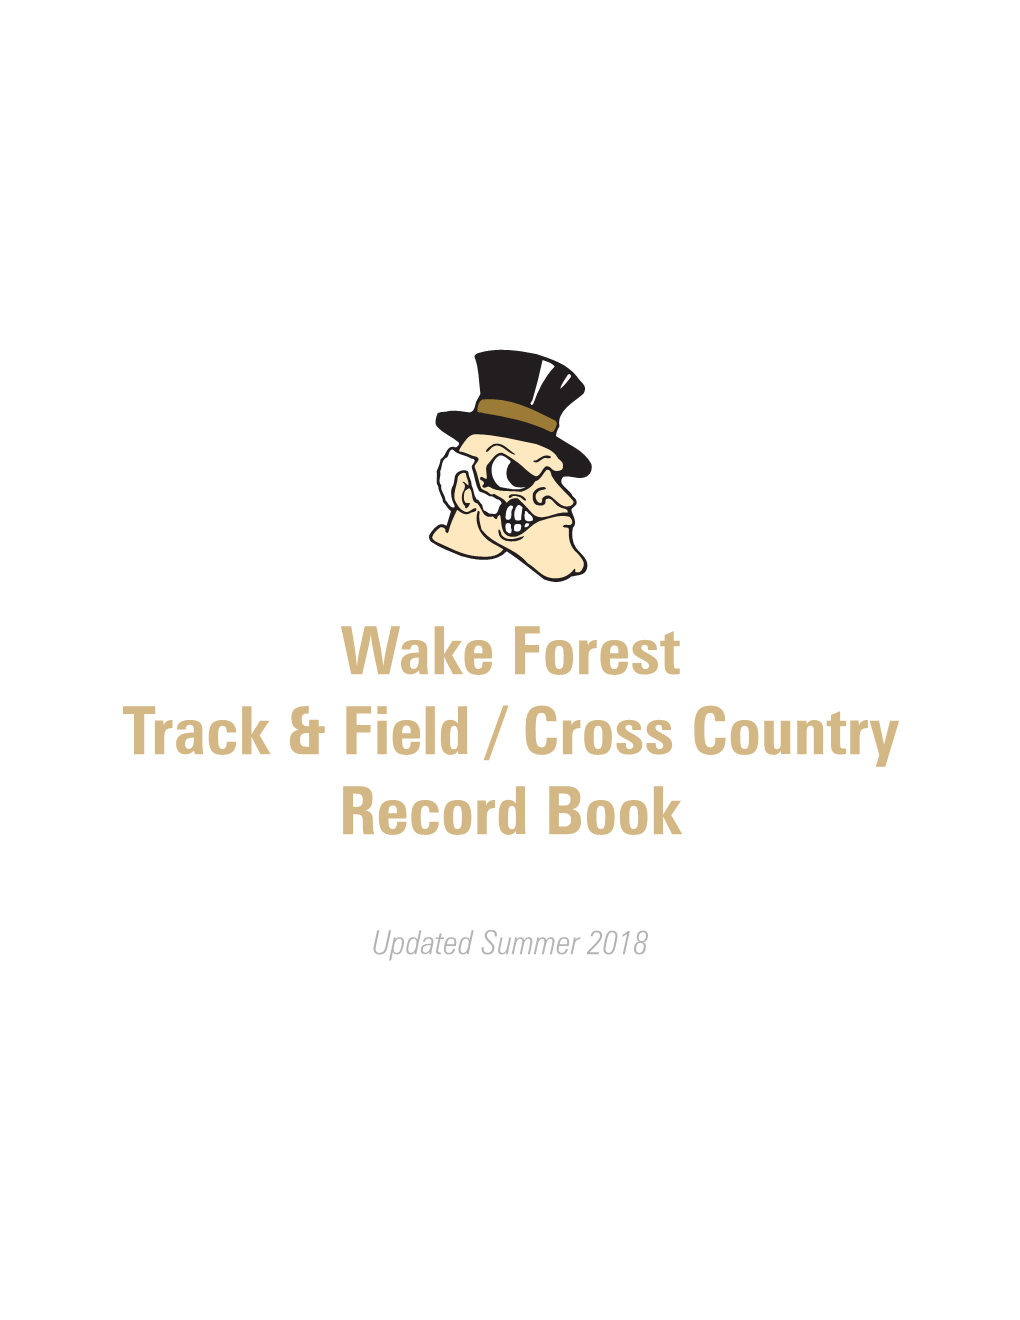 Wake Forest Track & Field / Cross Country Record Book